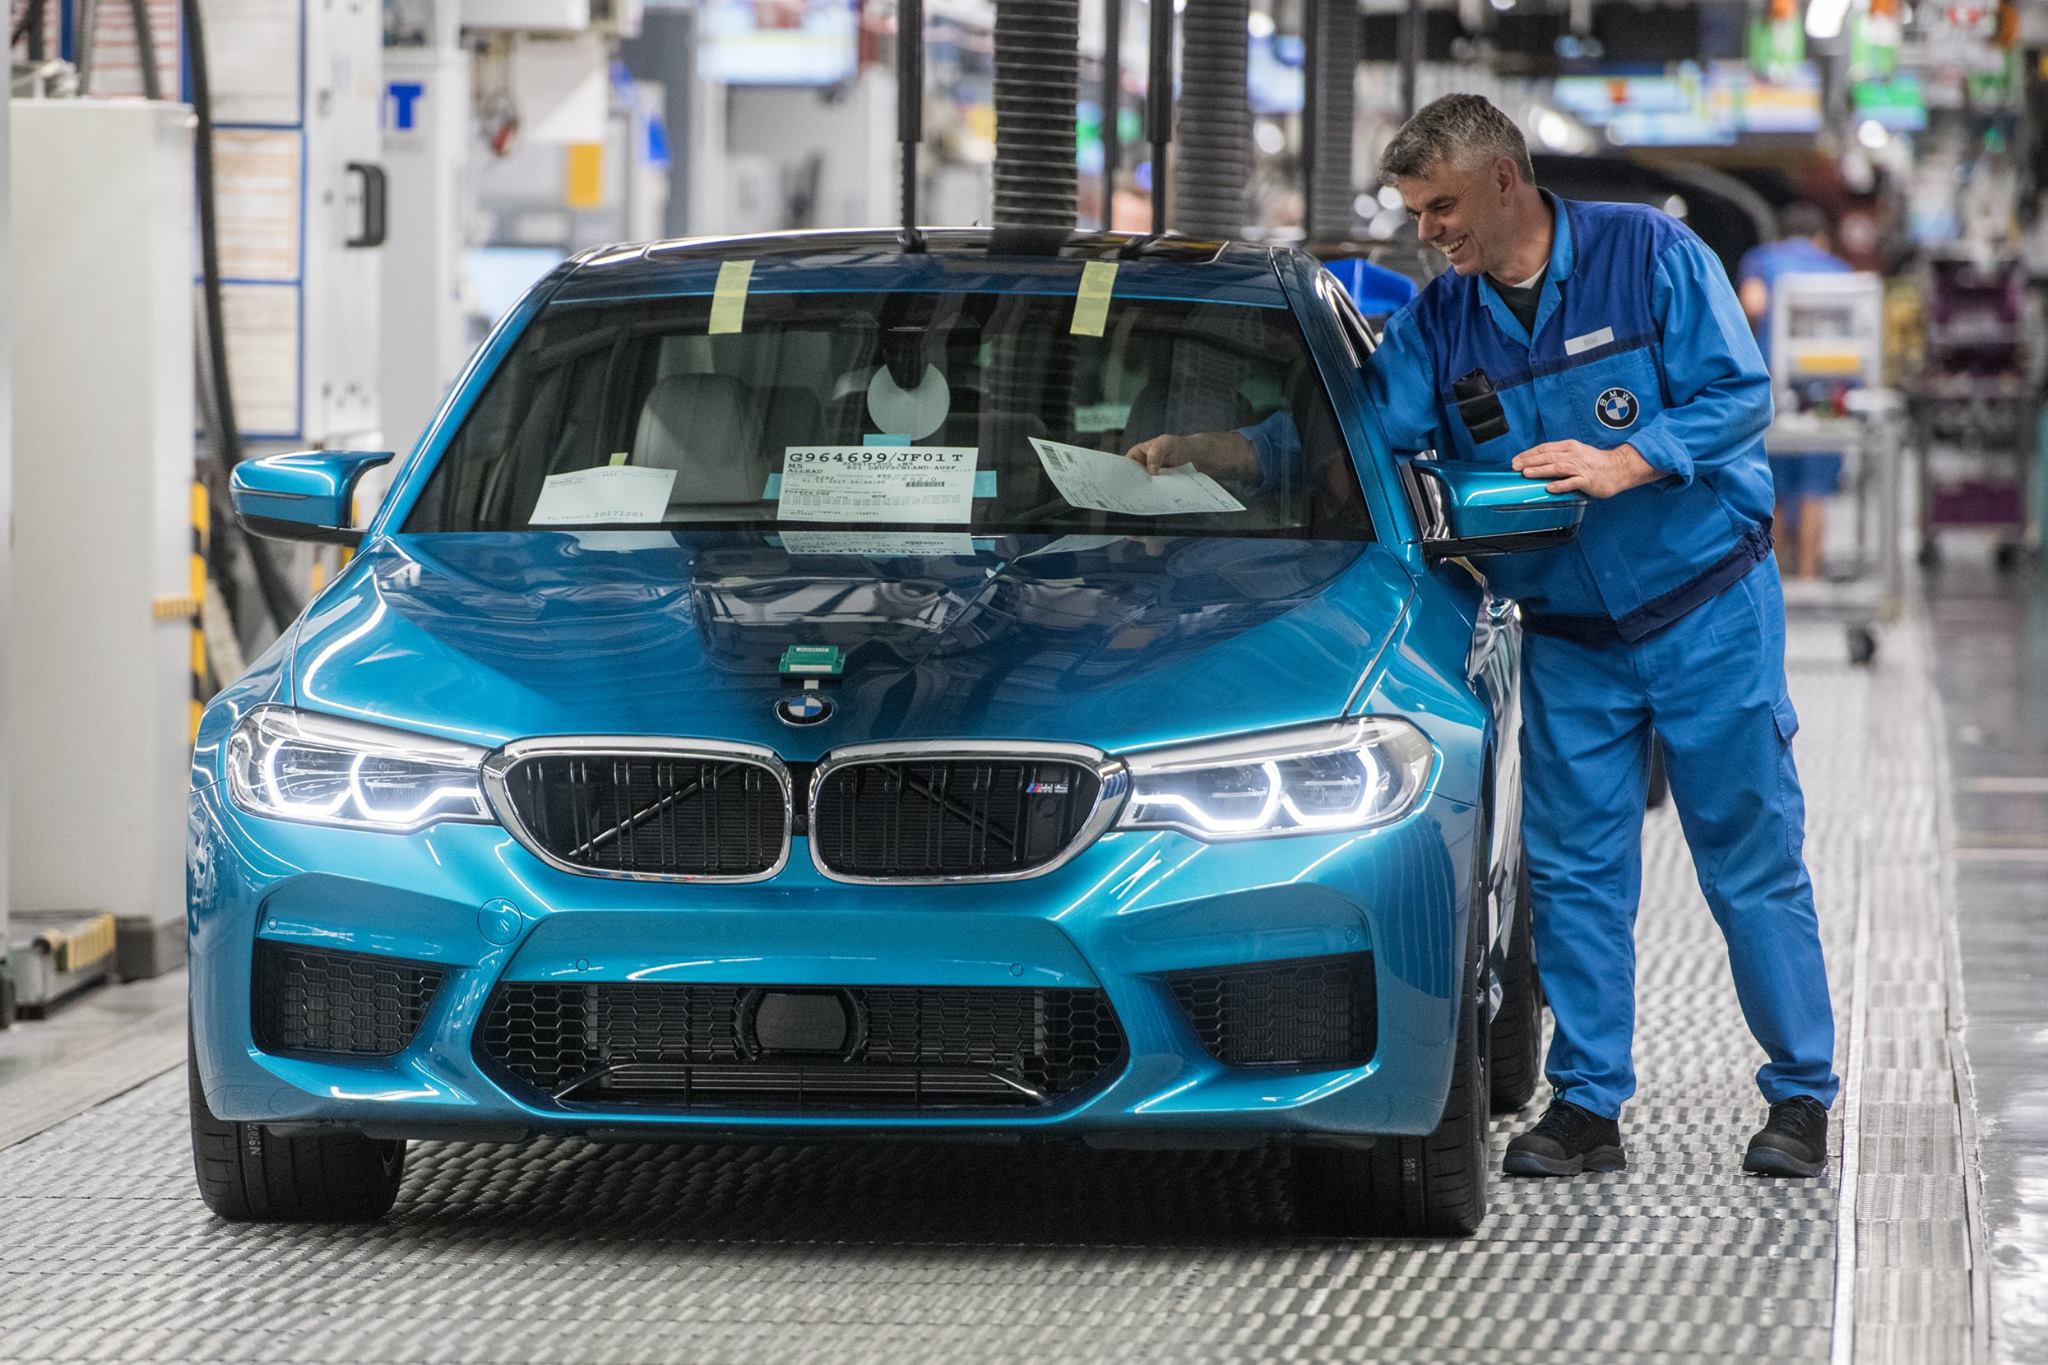 2018 BMW M5 production commences in Germany